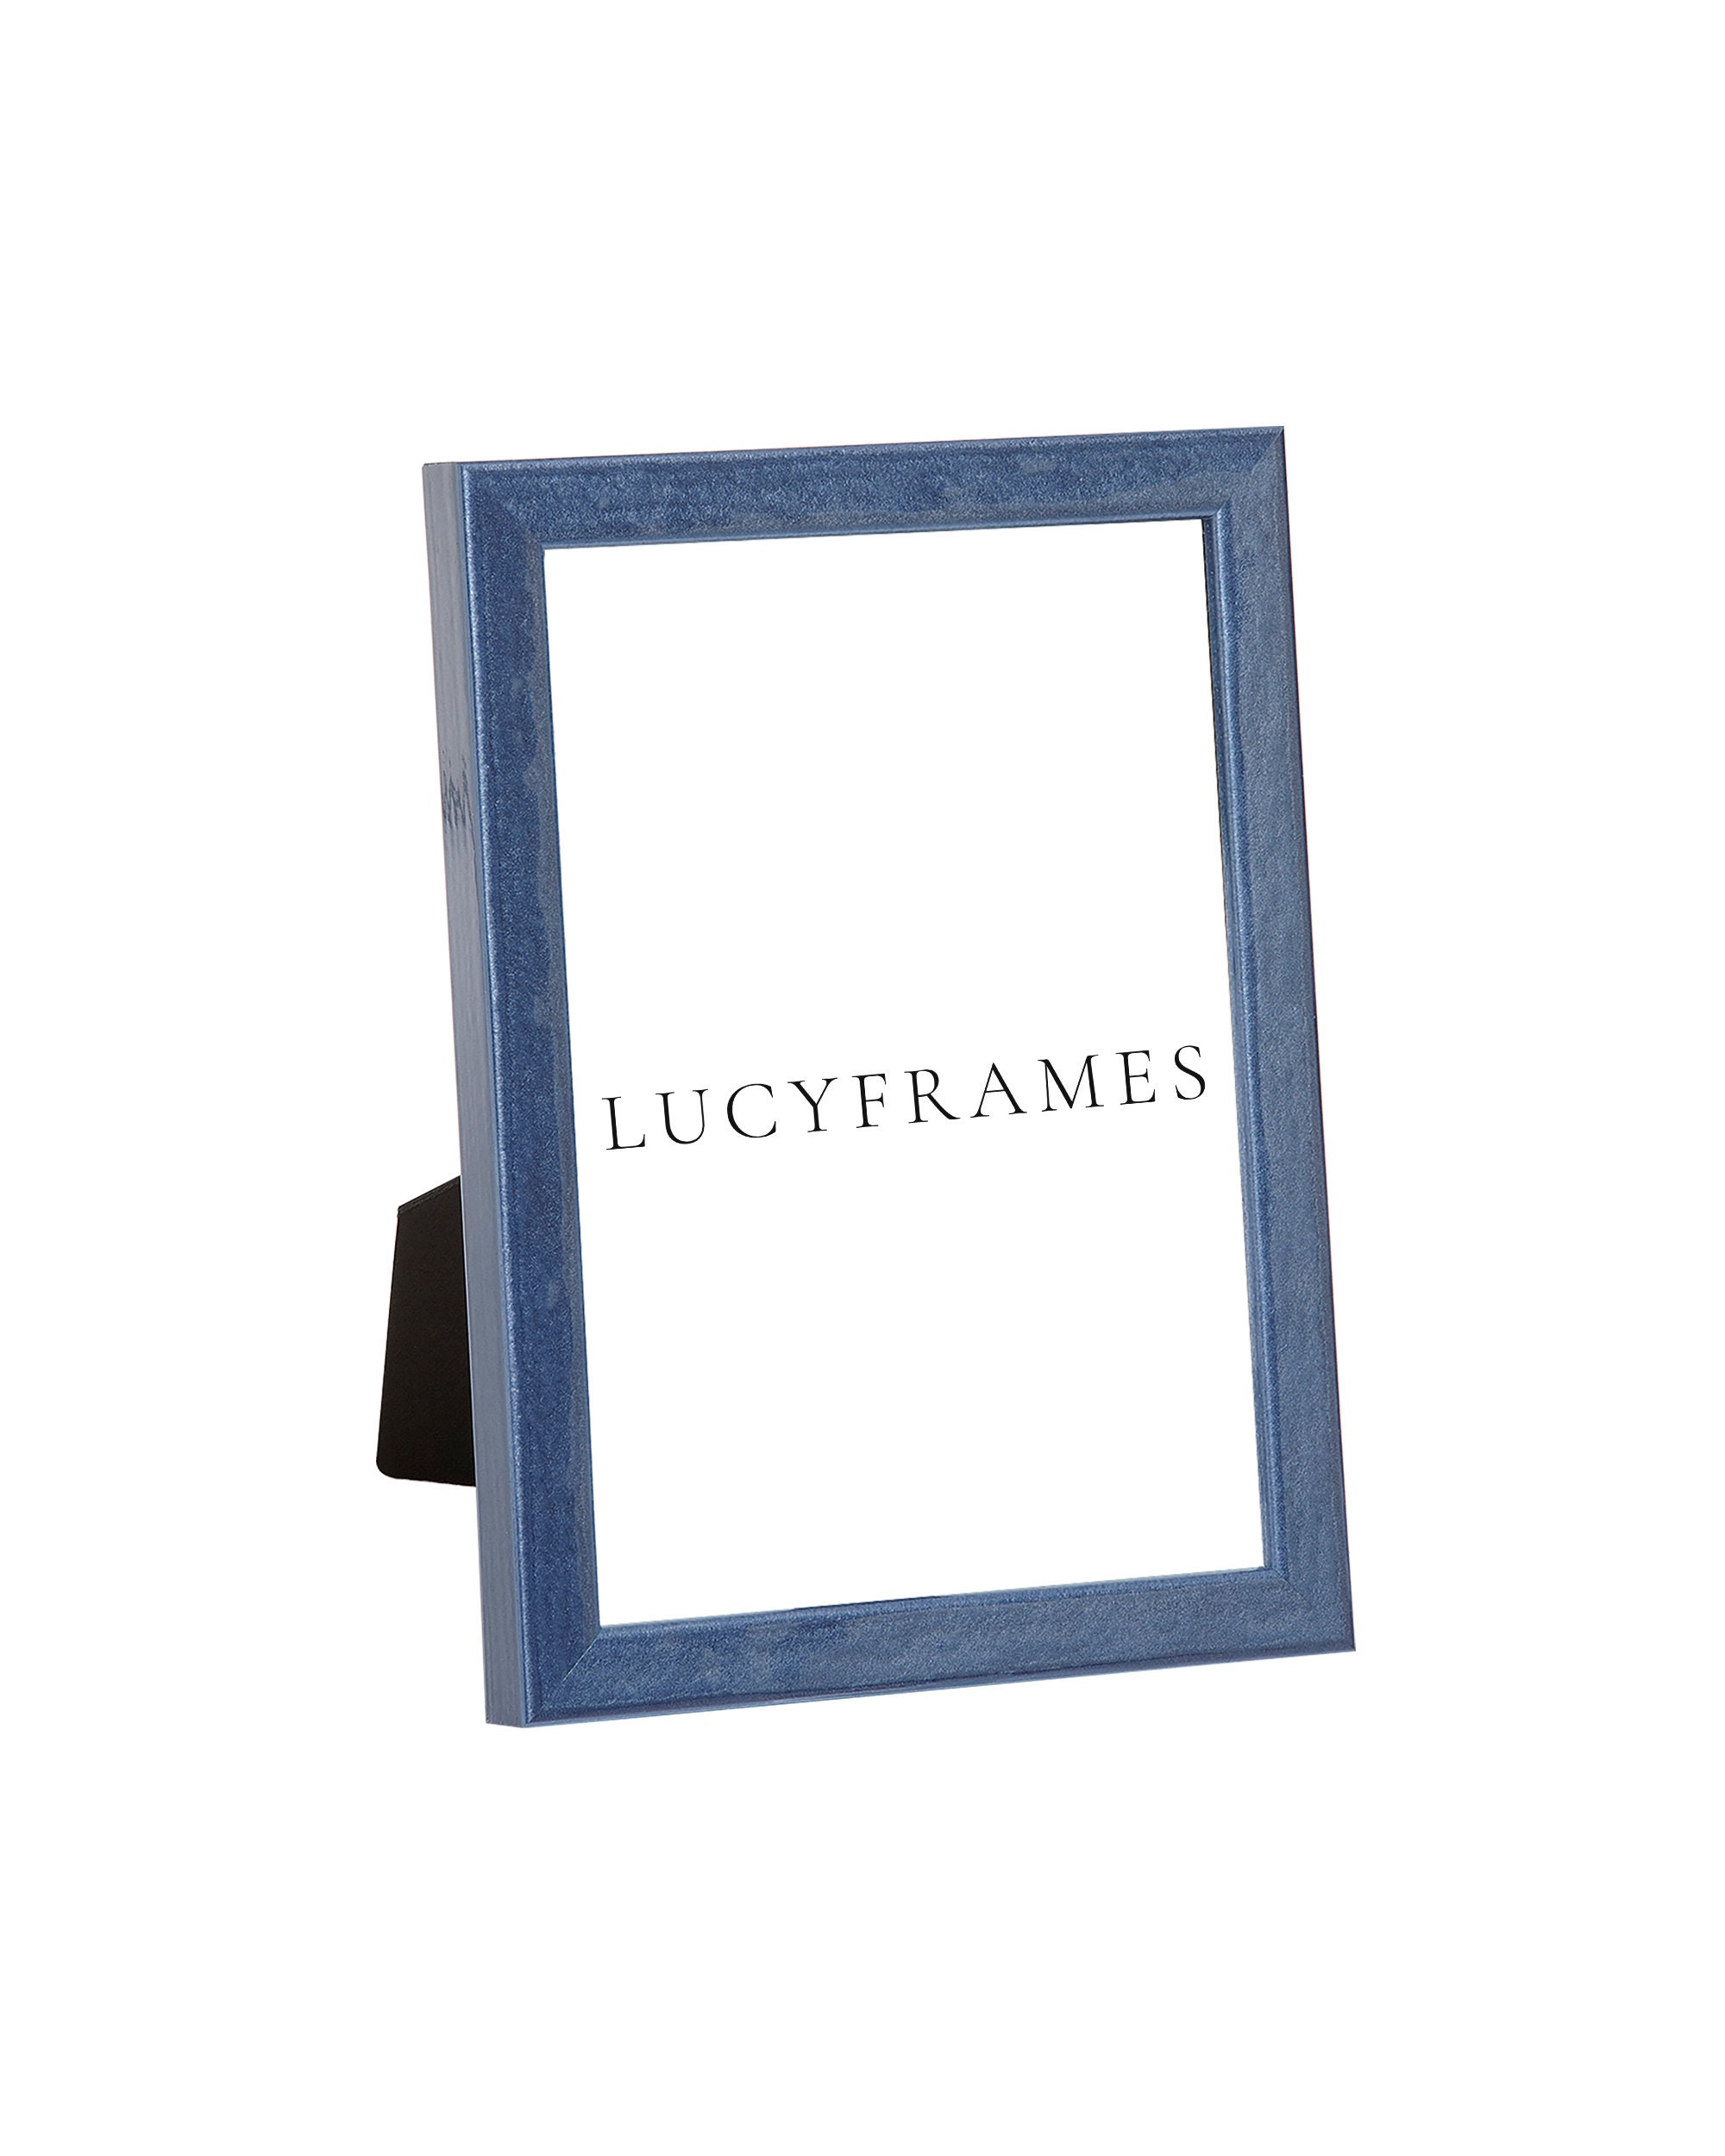 CountryArtHouse Easel Back Stand Fits A 11x14 Picture Frame Or Tile (Pkg/5)